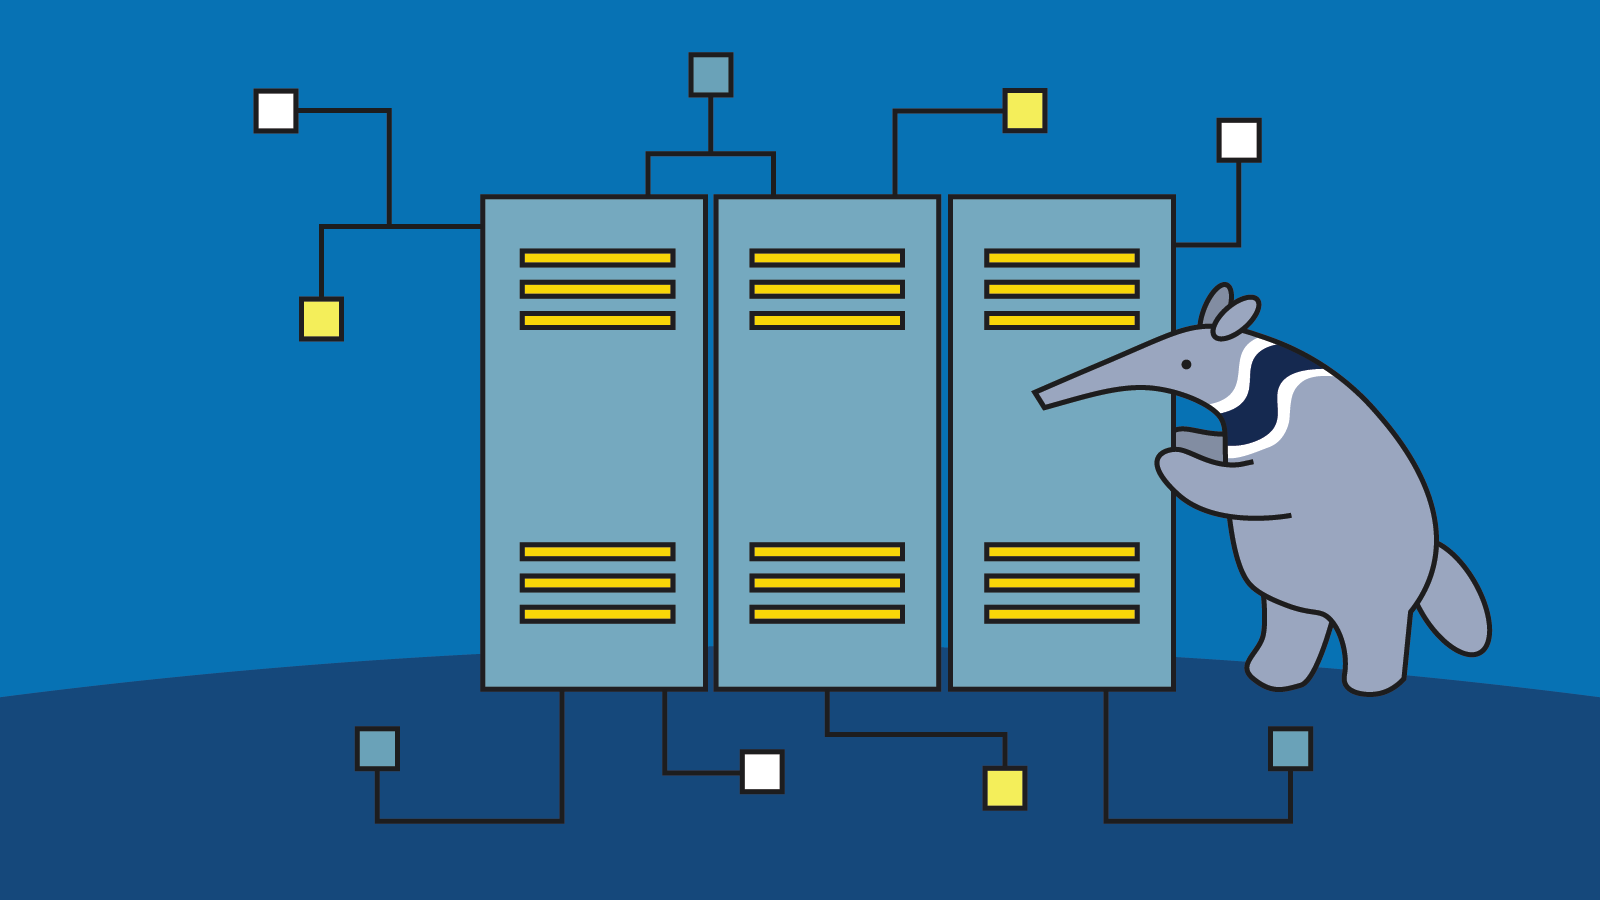 Peter the anteater standing next to servers in a server room.